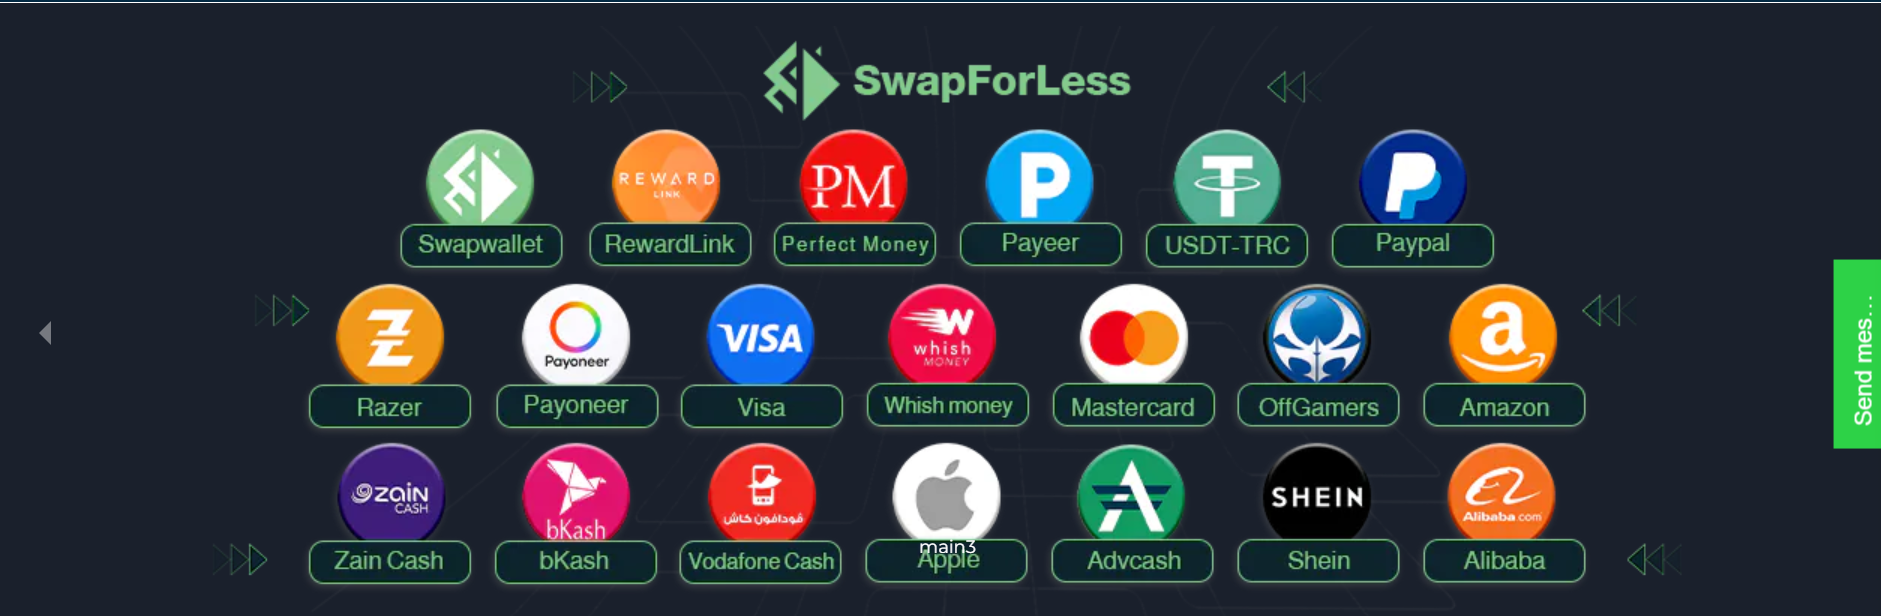 What are the Services of swapforless?